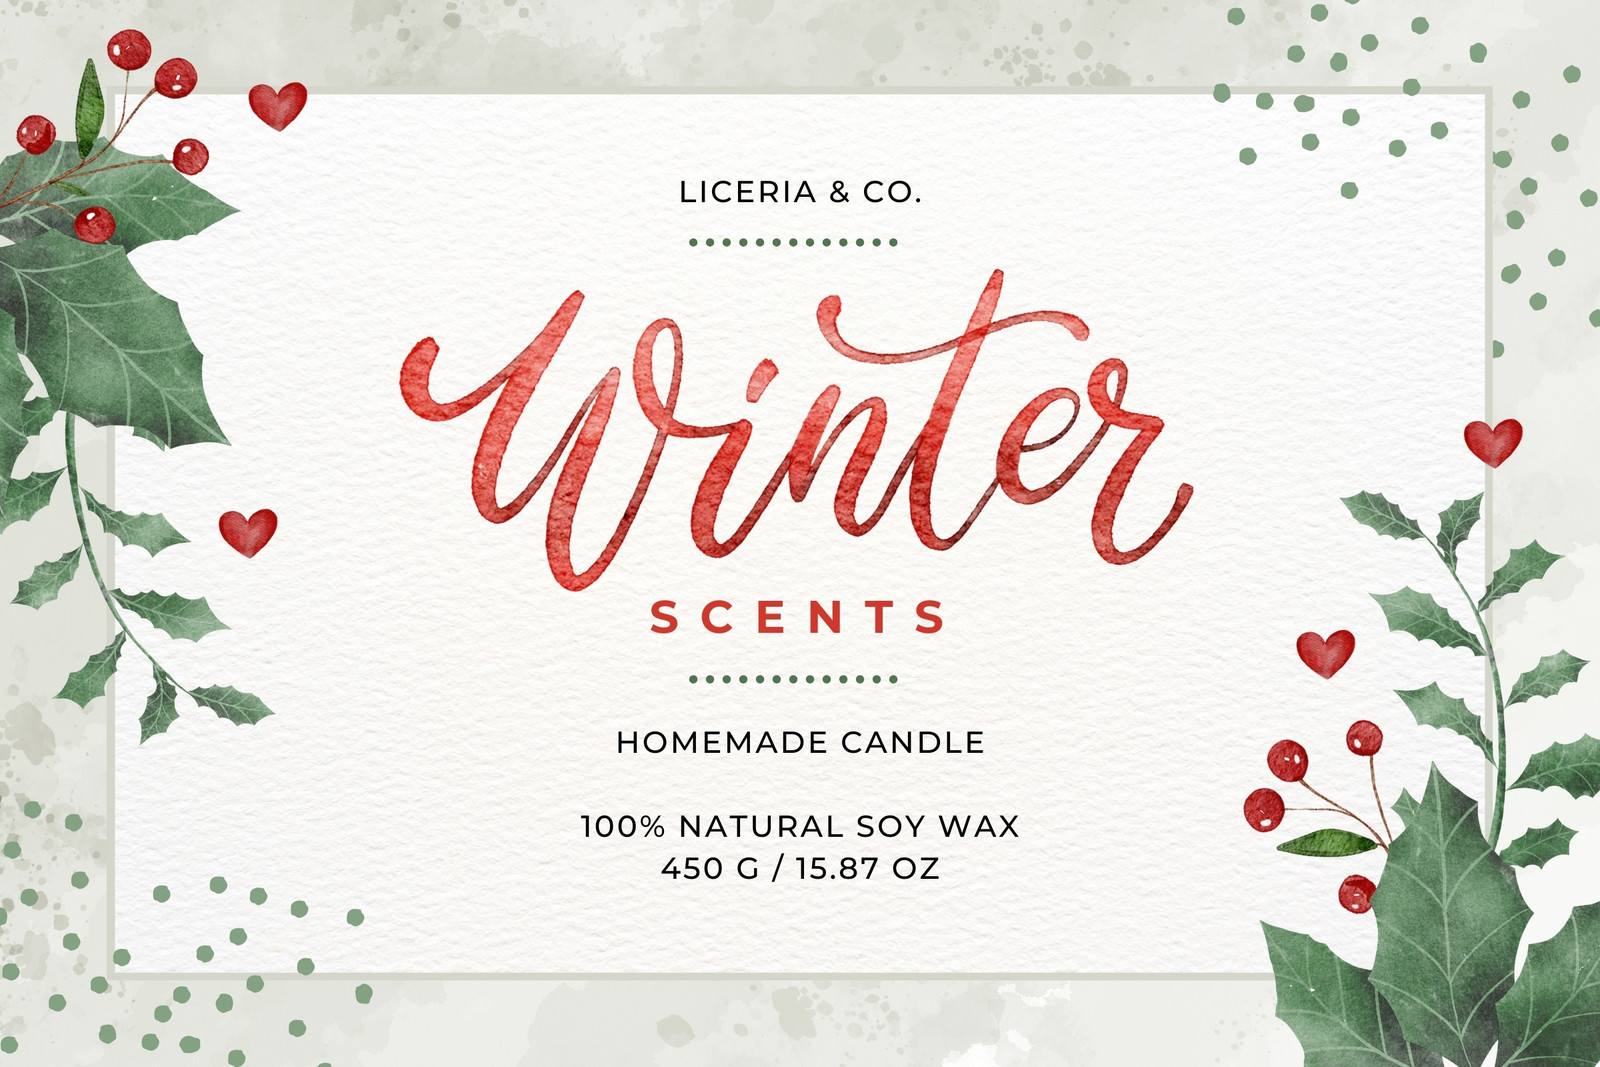 https://marketplace.canva.com/EAFy0pGjCAQ/1/0/1600w/canva-red-green-cute-illustrated-typography-winter-candle-label-NTgXX5AGYek.jpg